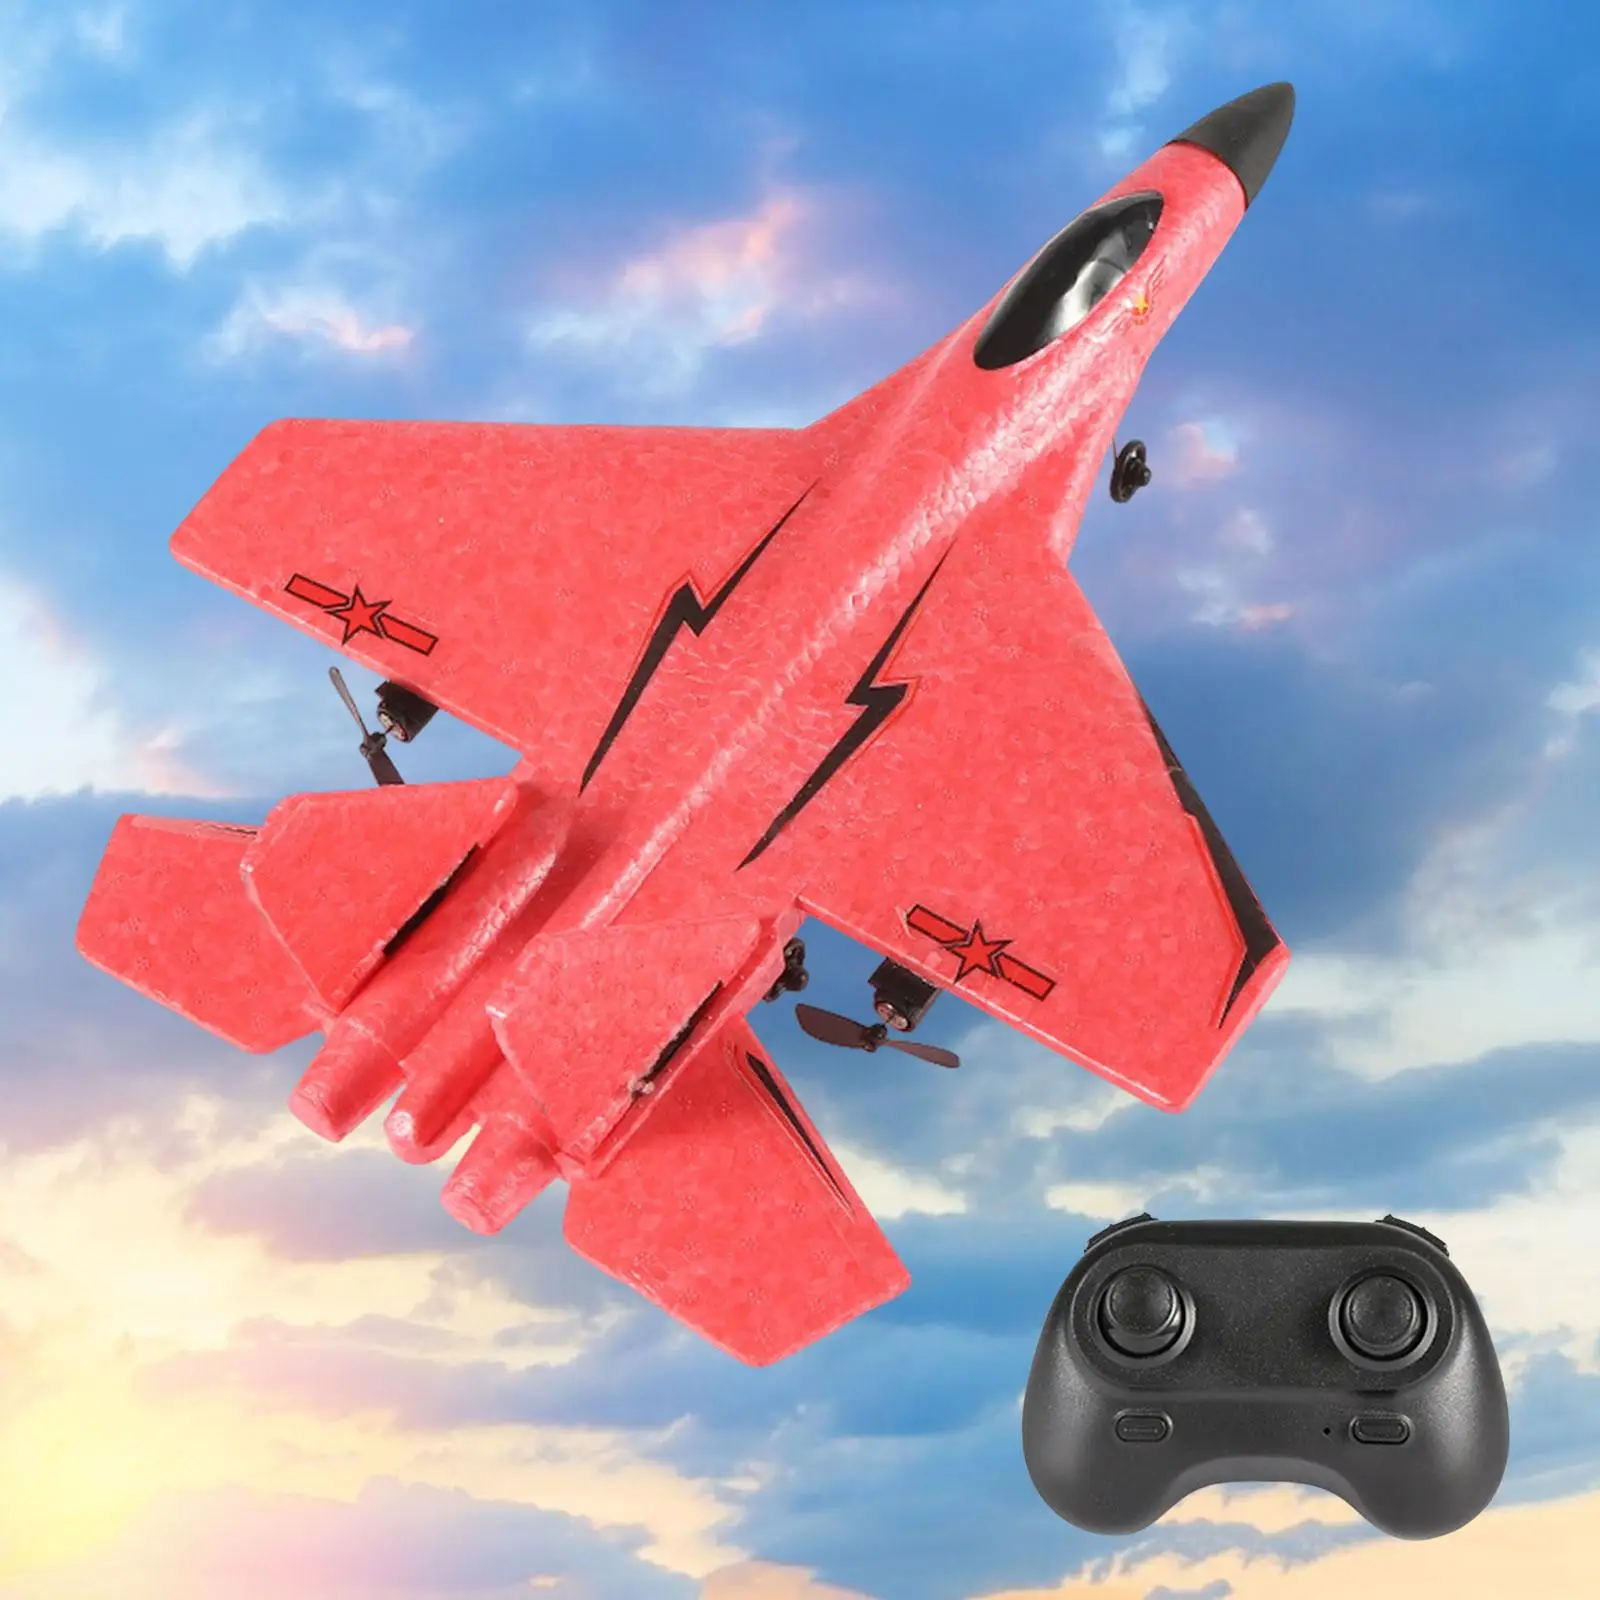 RC Plane Foam Airplane Ready to Flying A Key to Take Off Fighter Model with Cool Light 2CH Anti Falling Remote Control Aircraft